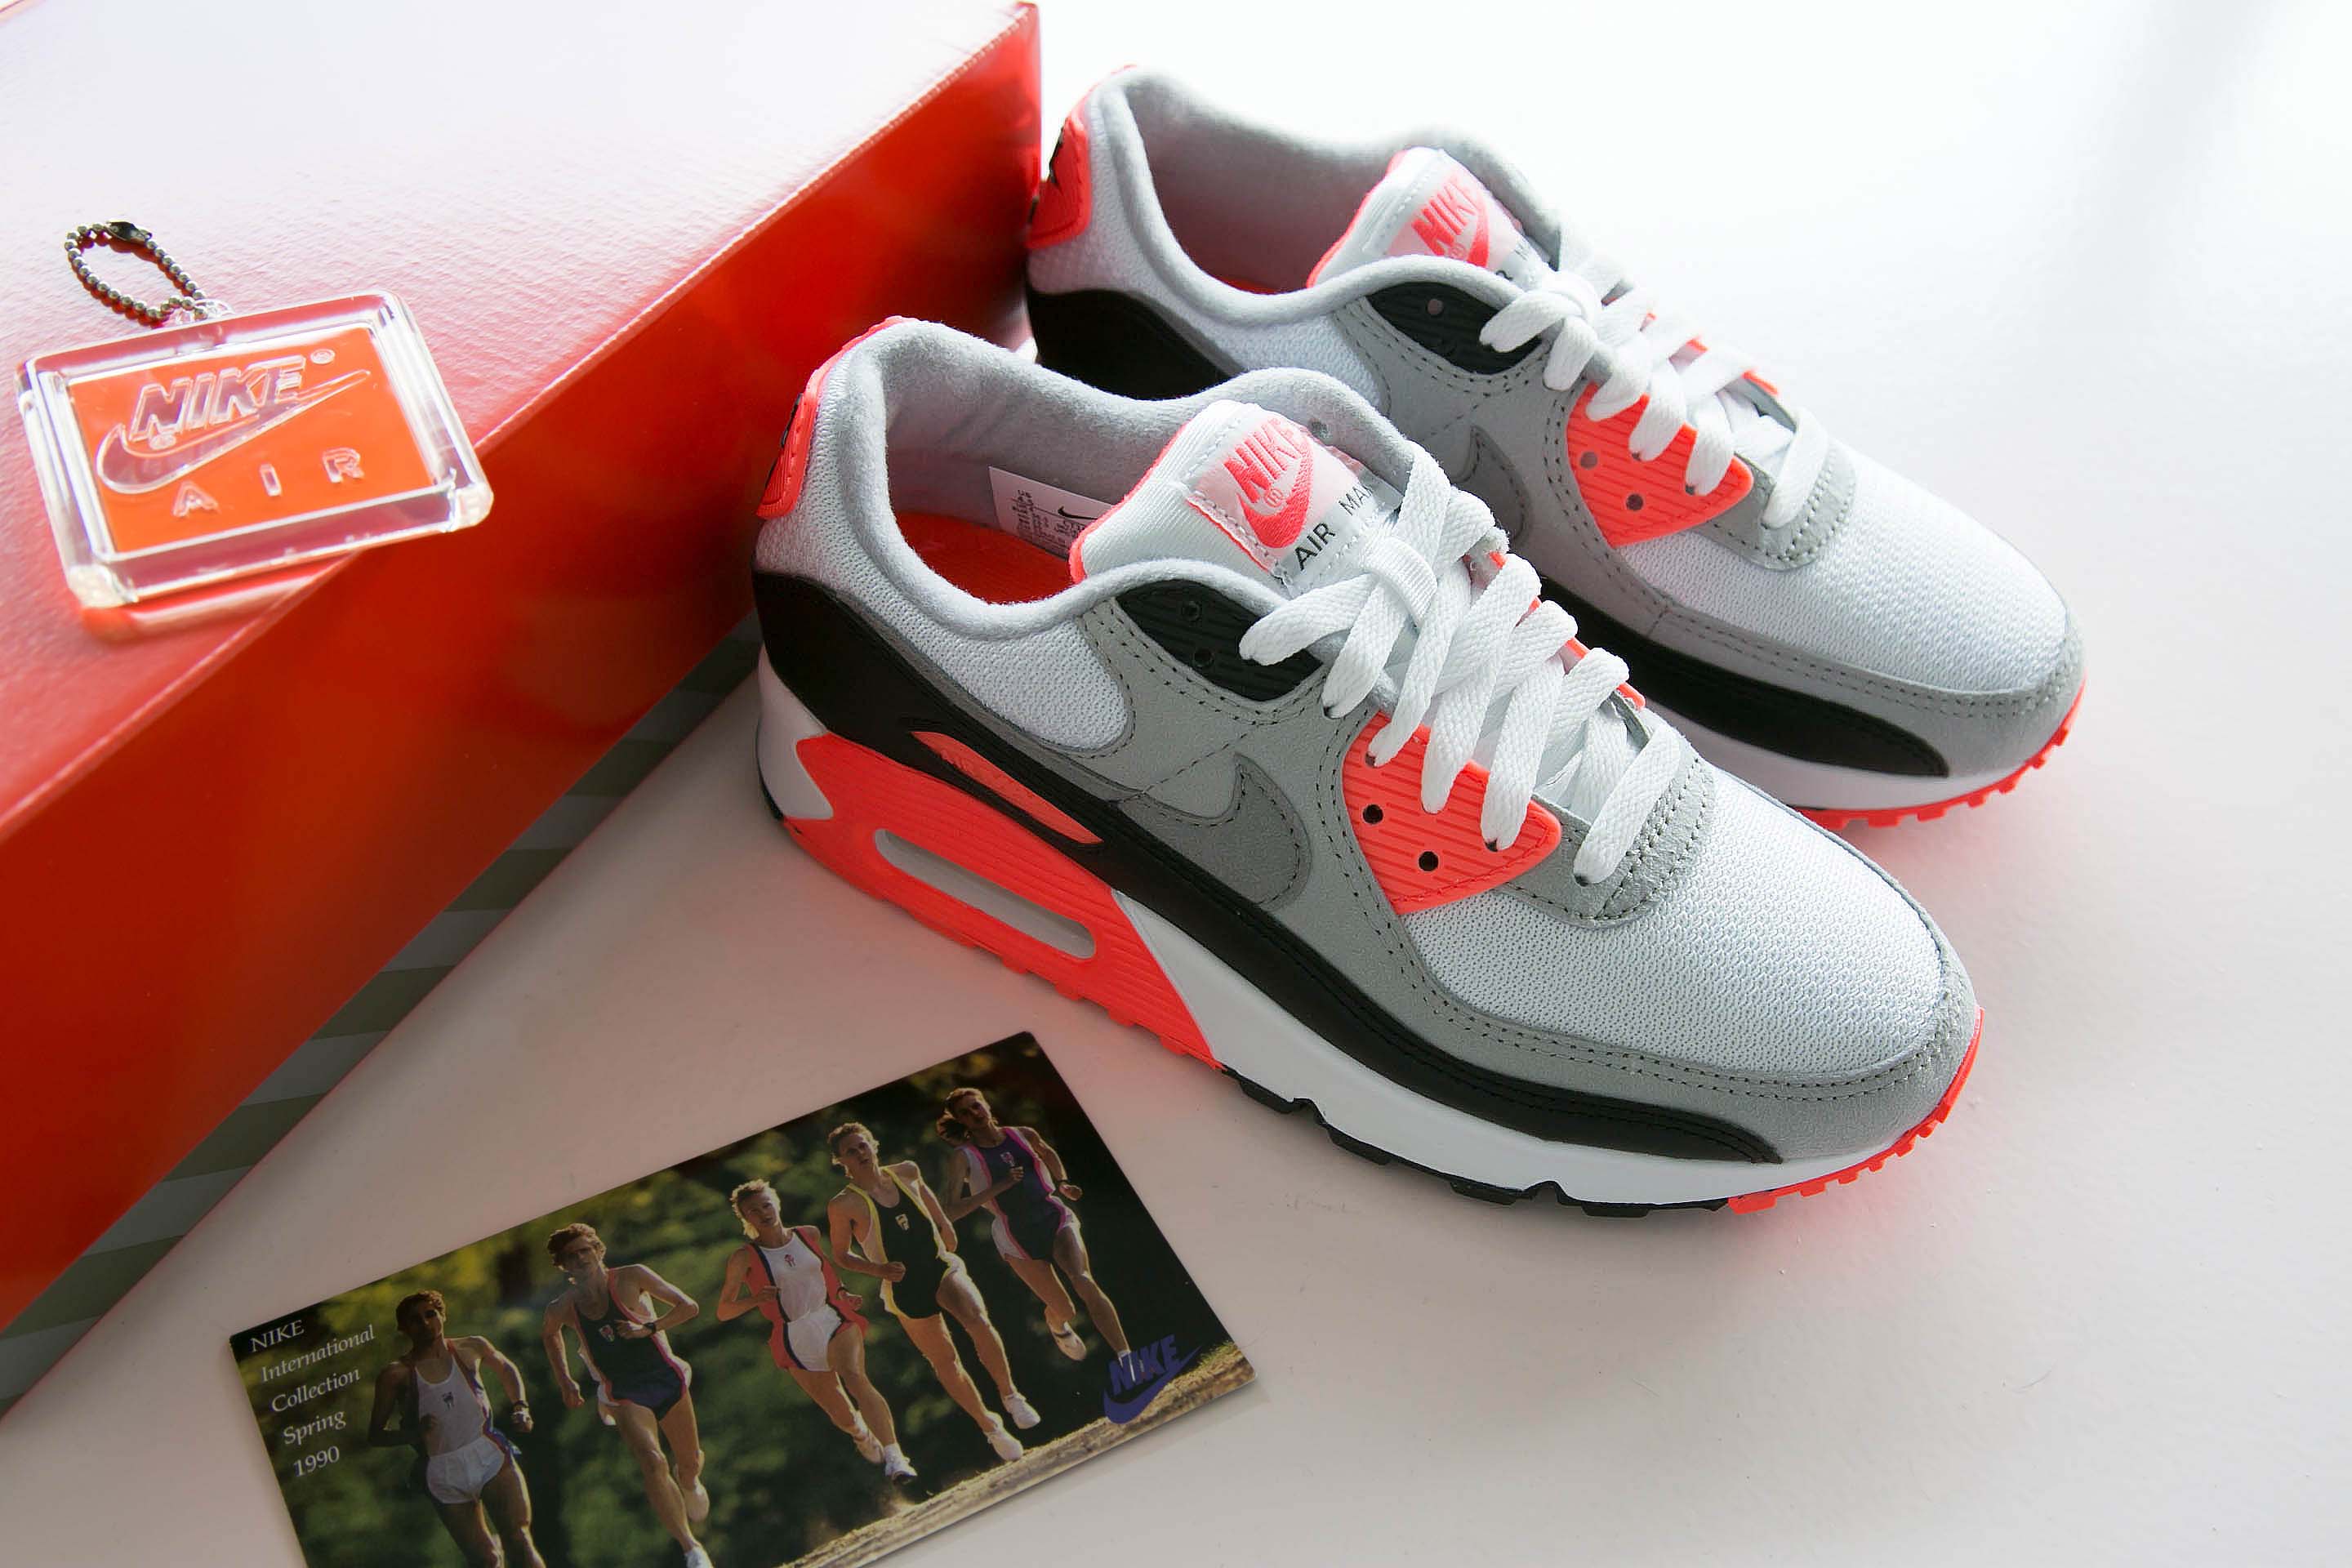 Nike Air Max III "Infrared" | October 22 | SNEAKER RELEASES